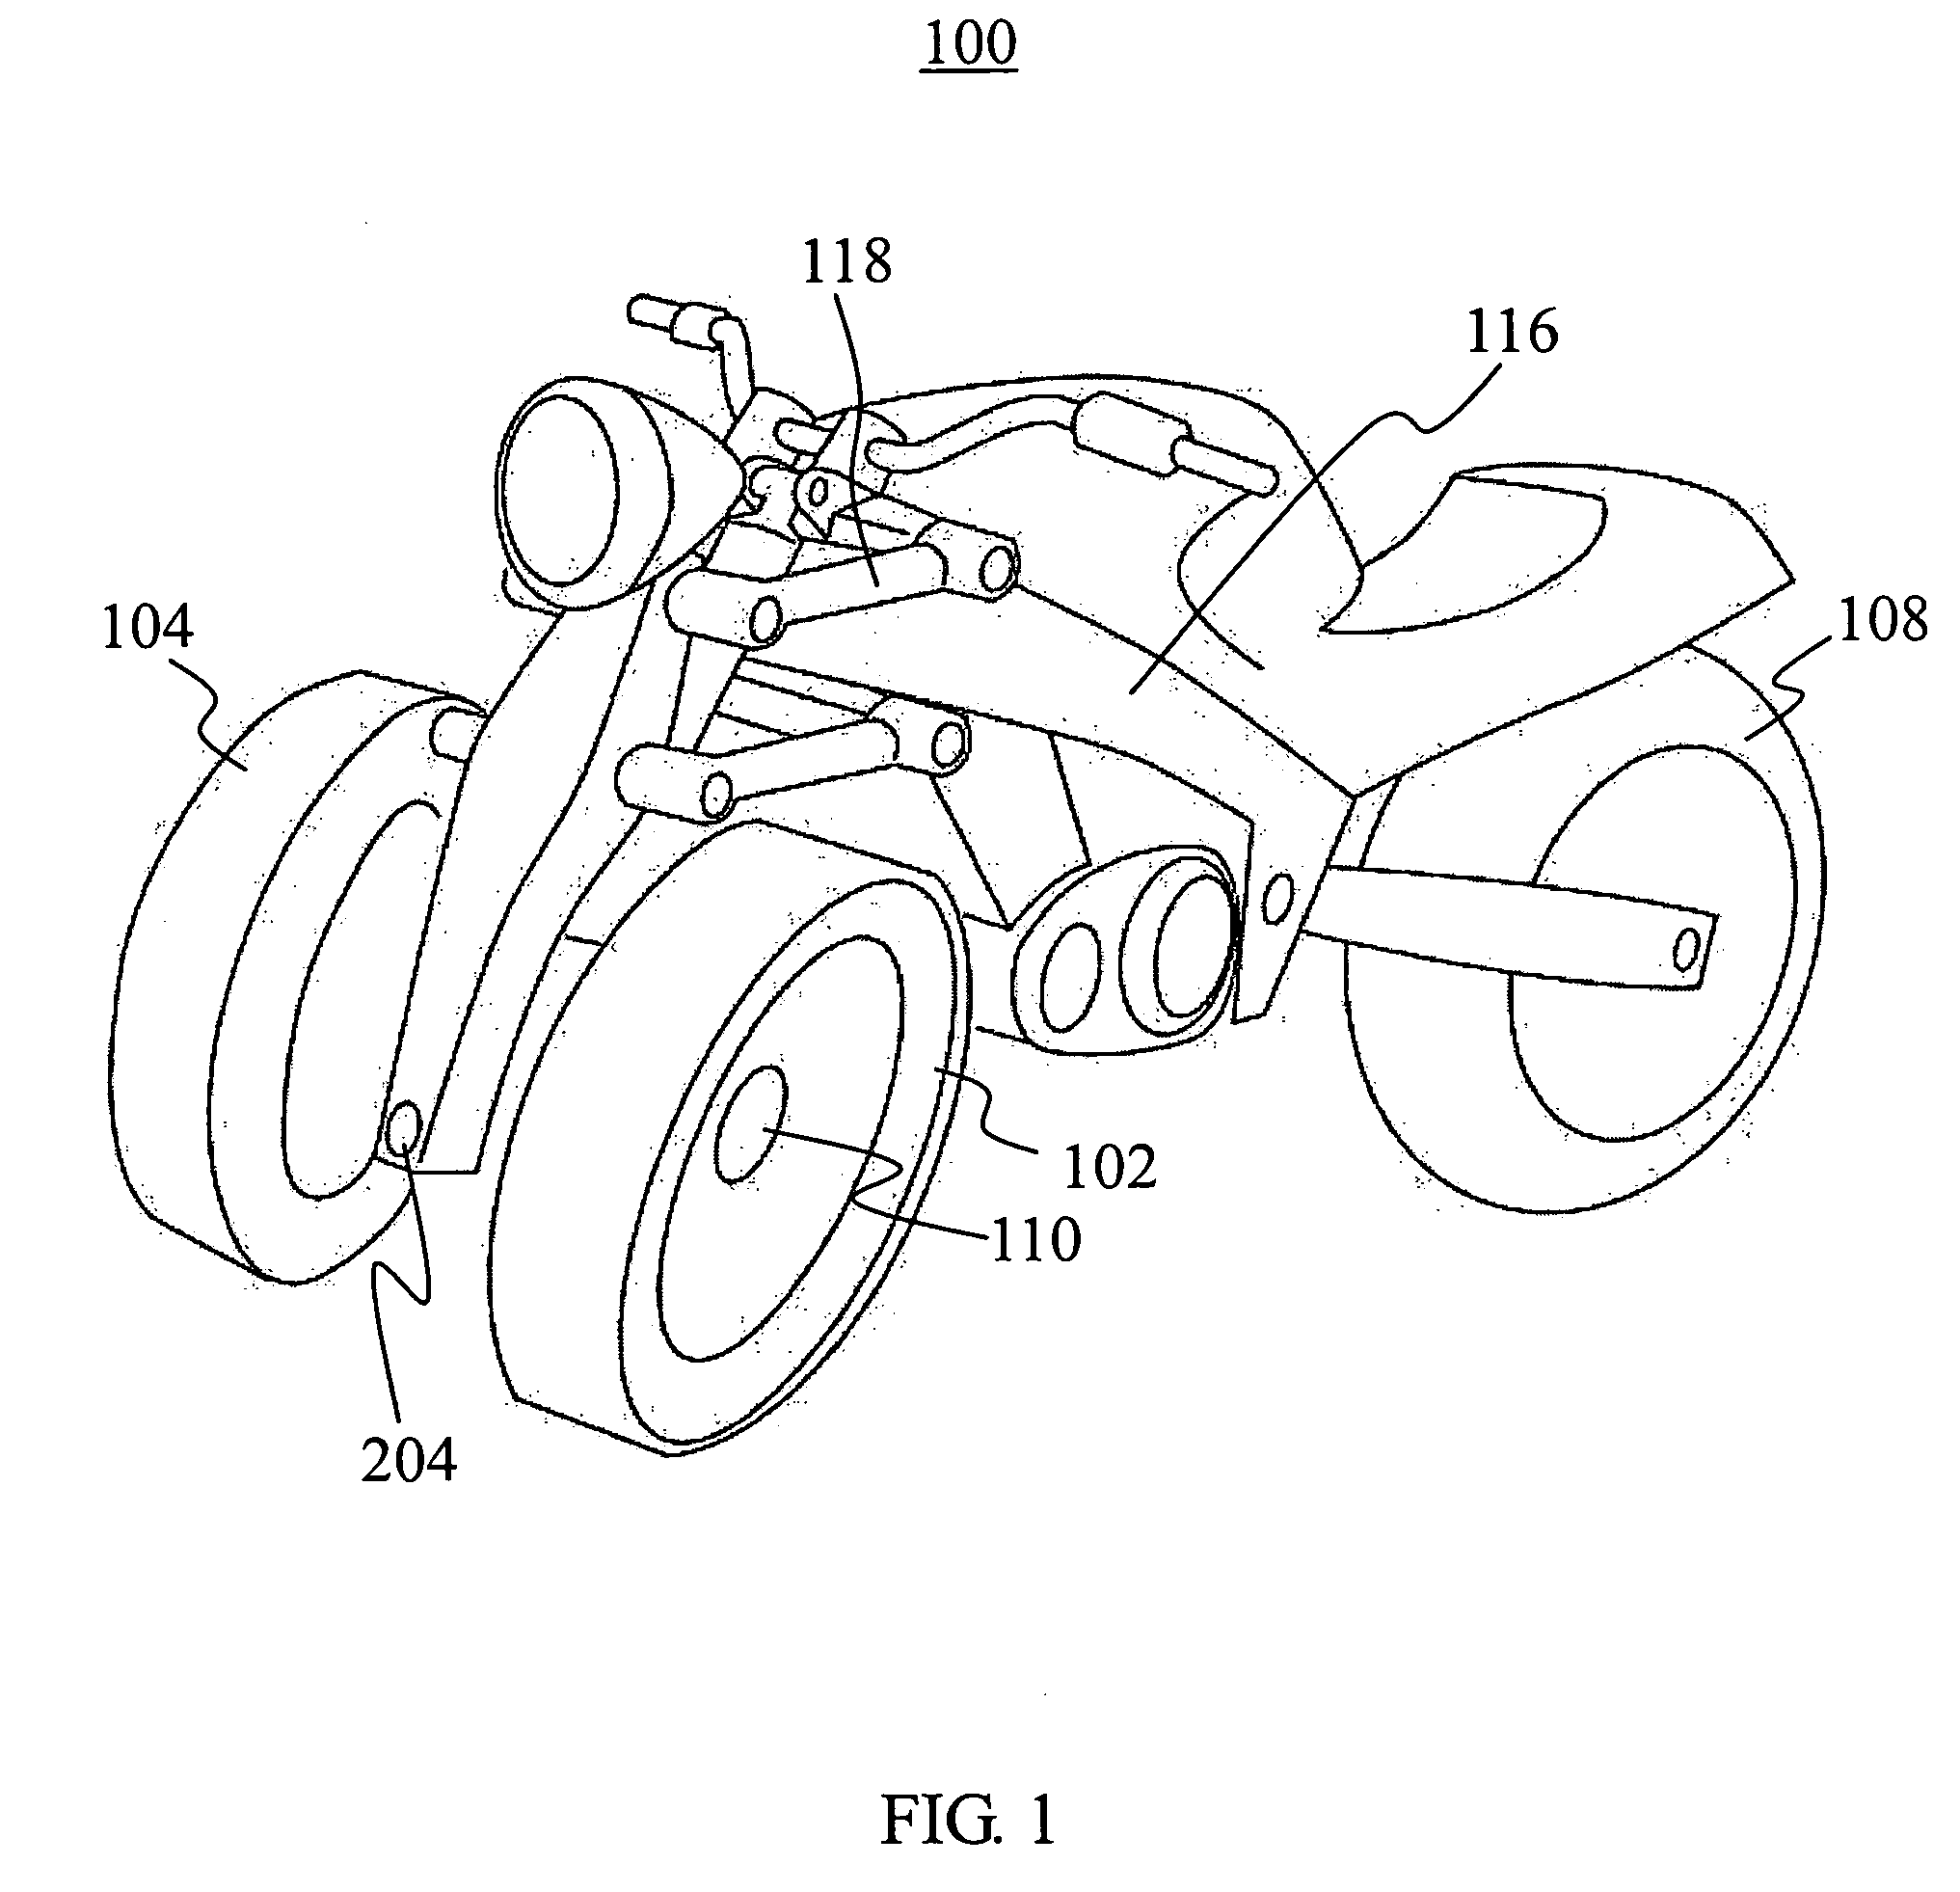 Front suspension and steering system for cycles and motorcycles without tilting of the front wheels